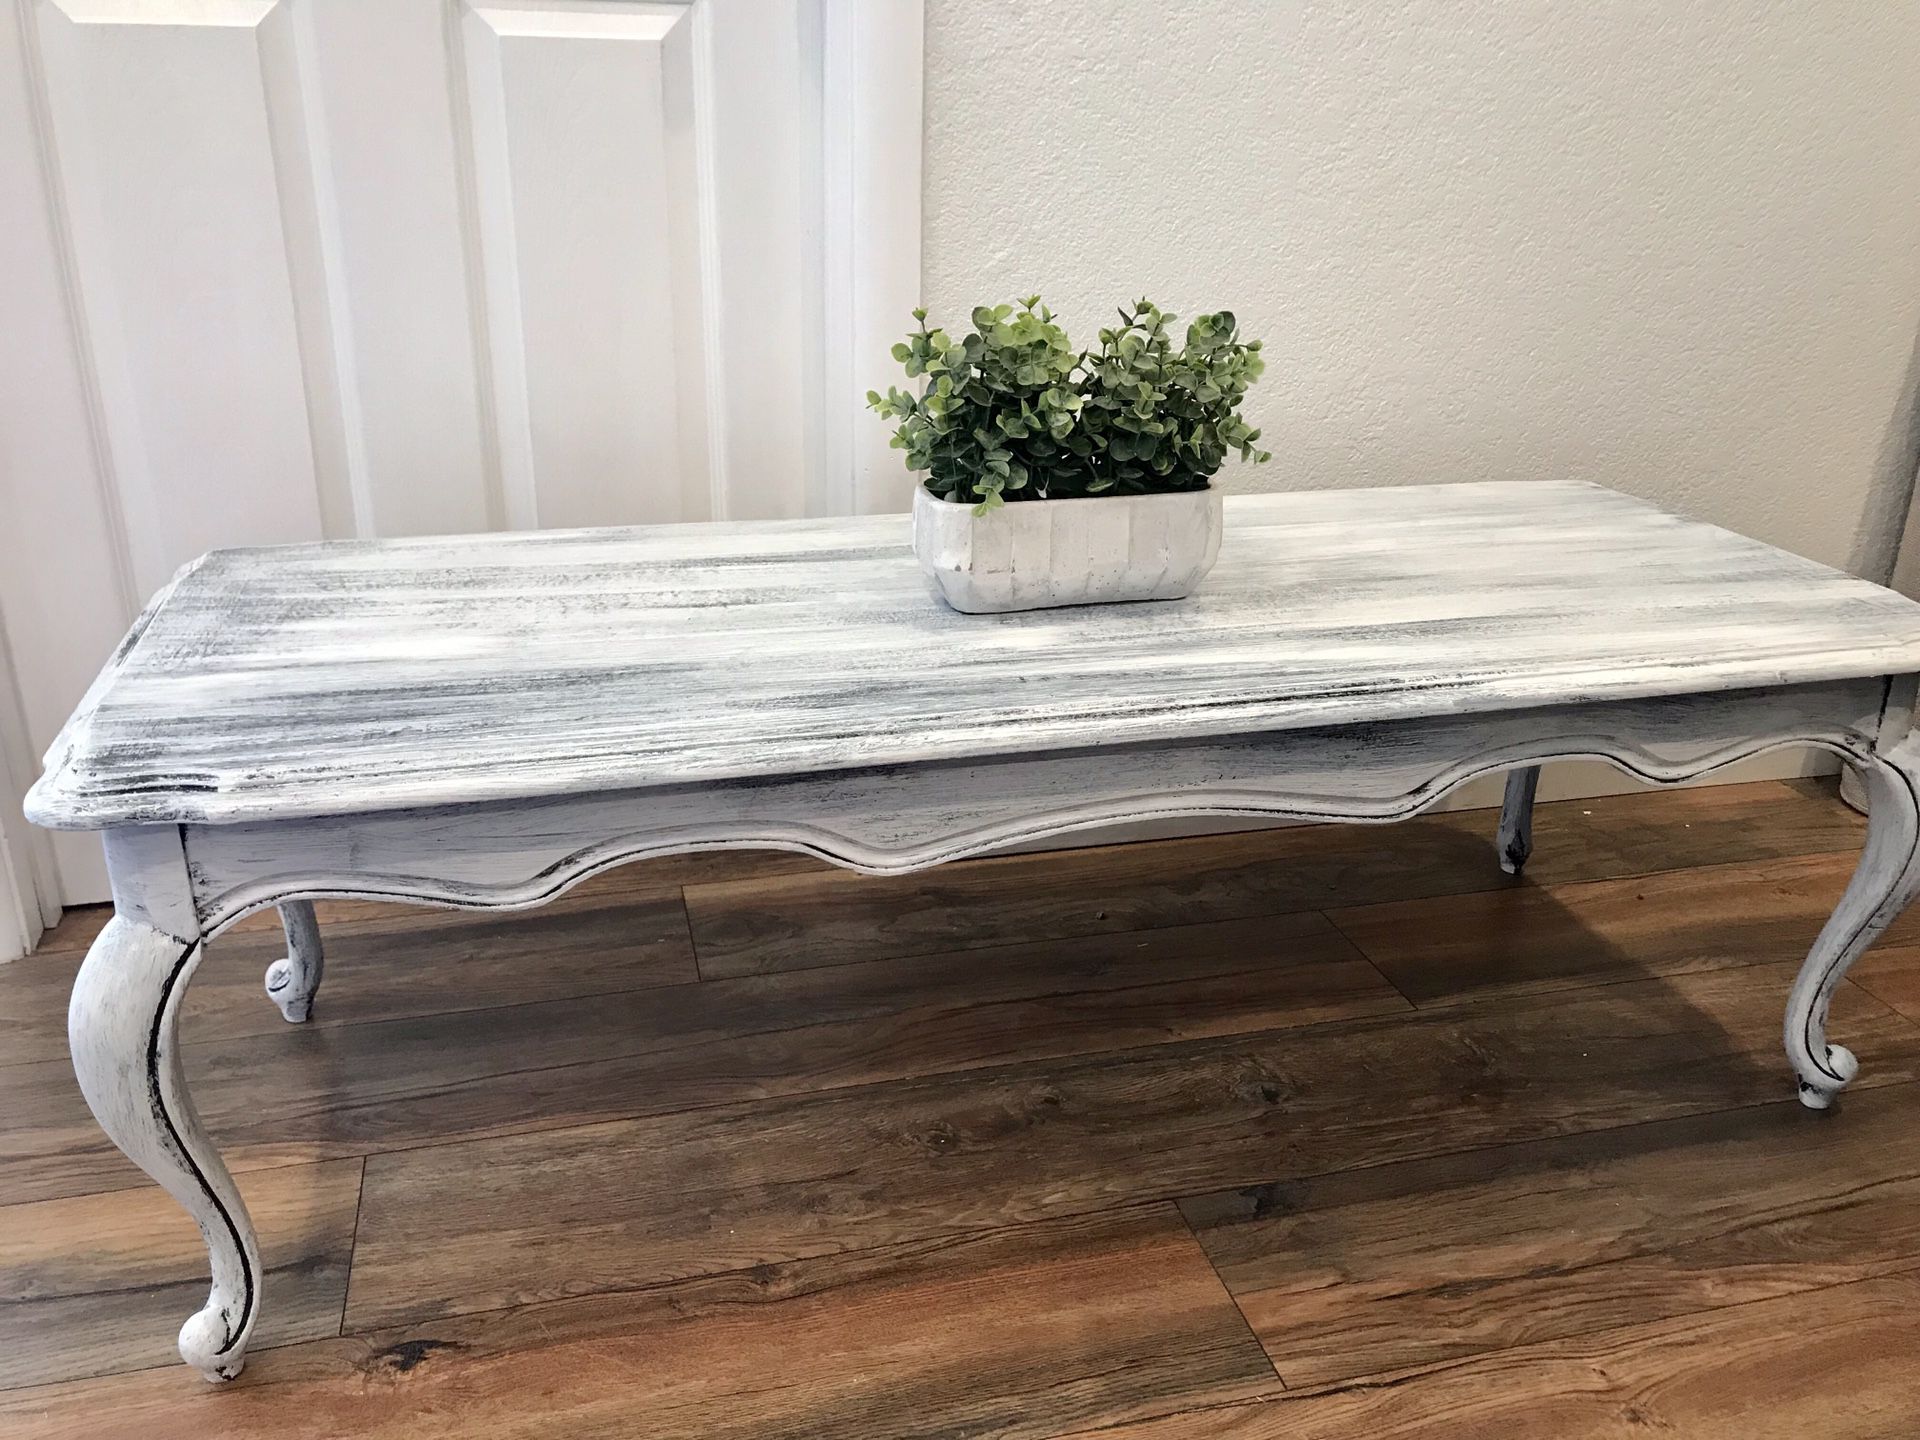 Refinished distressed look Basset brand coffee table